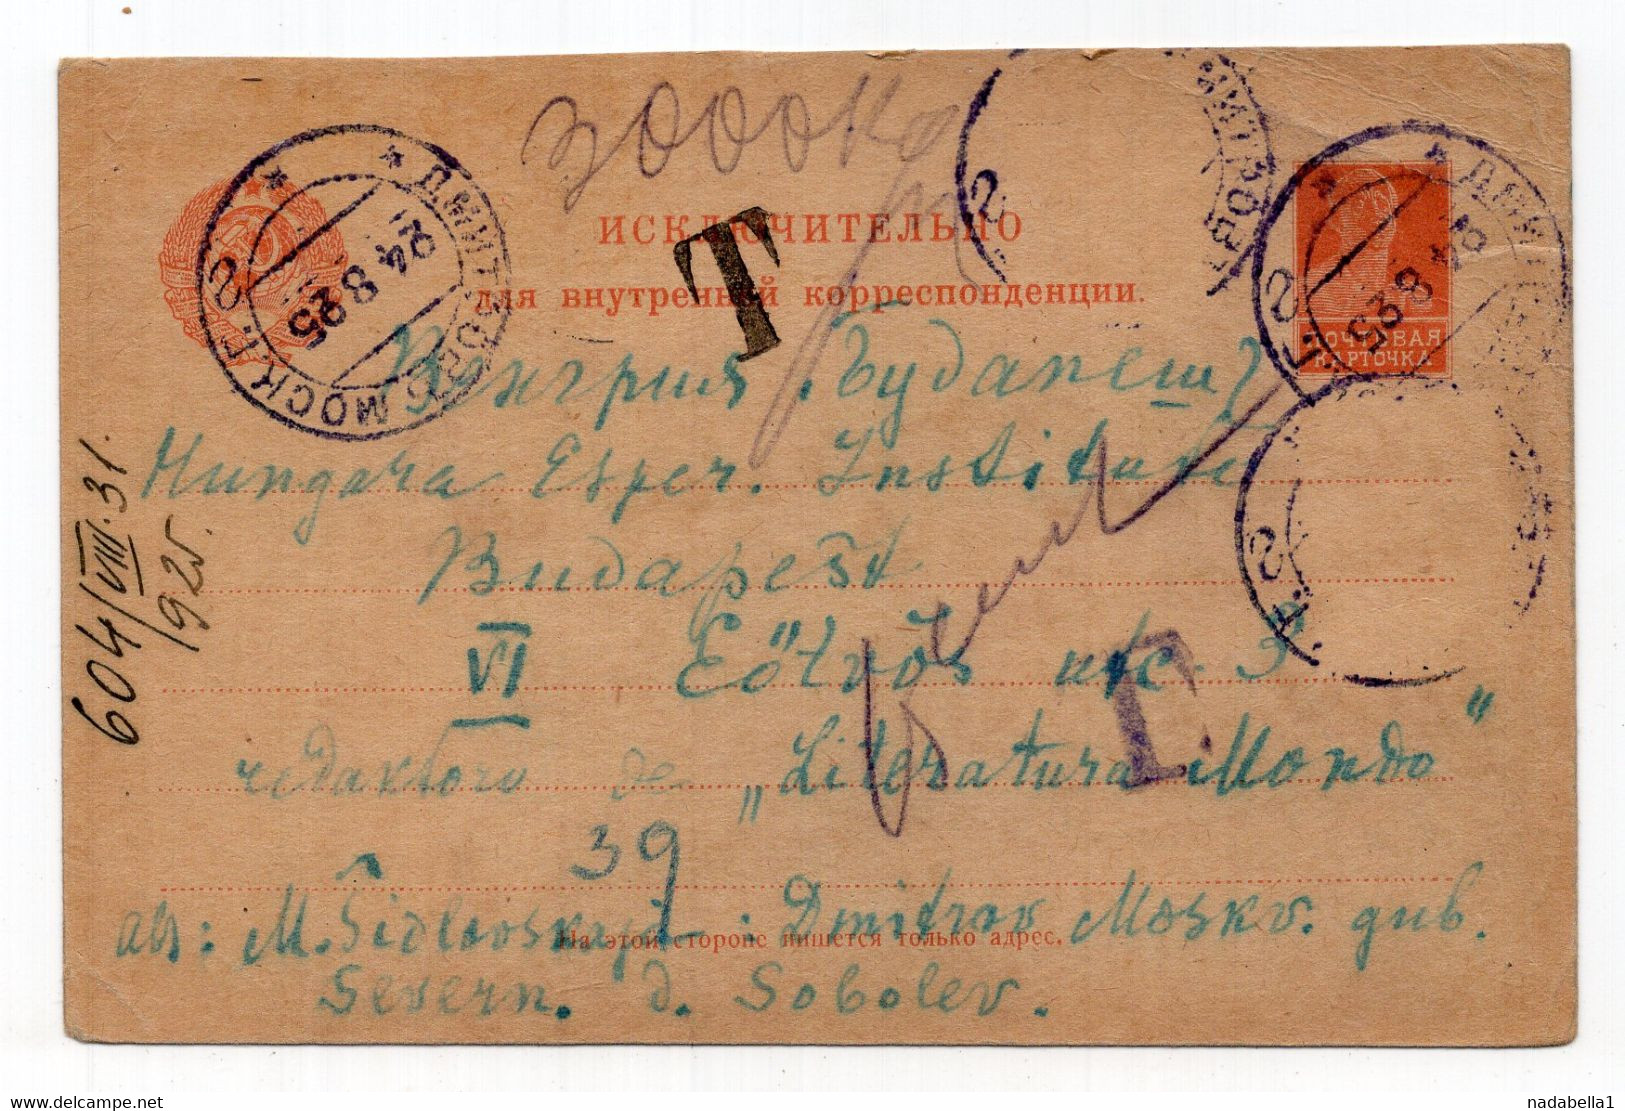 1925. RUSSIA, SOVIET, MOSCOW TO HUNGARY, T, POSTAGE DUE, STATIONERY CARD, USED - ...-1949